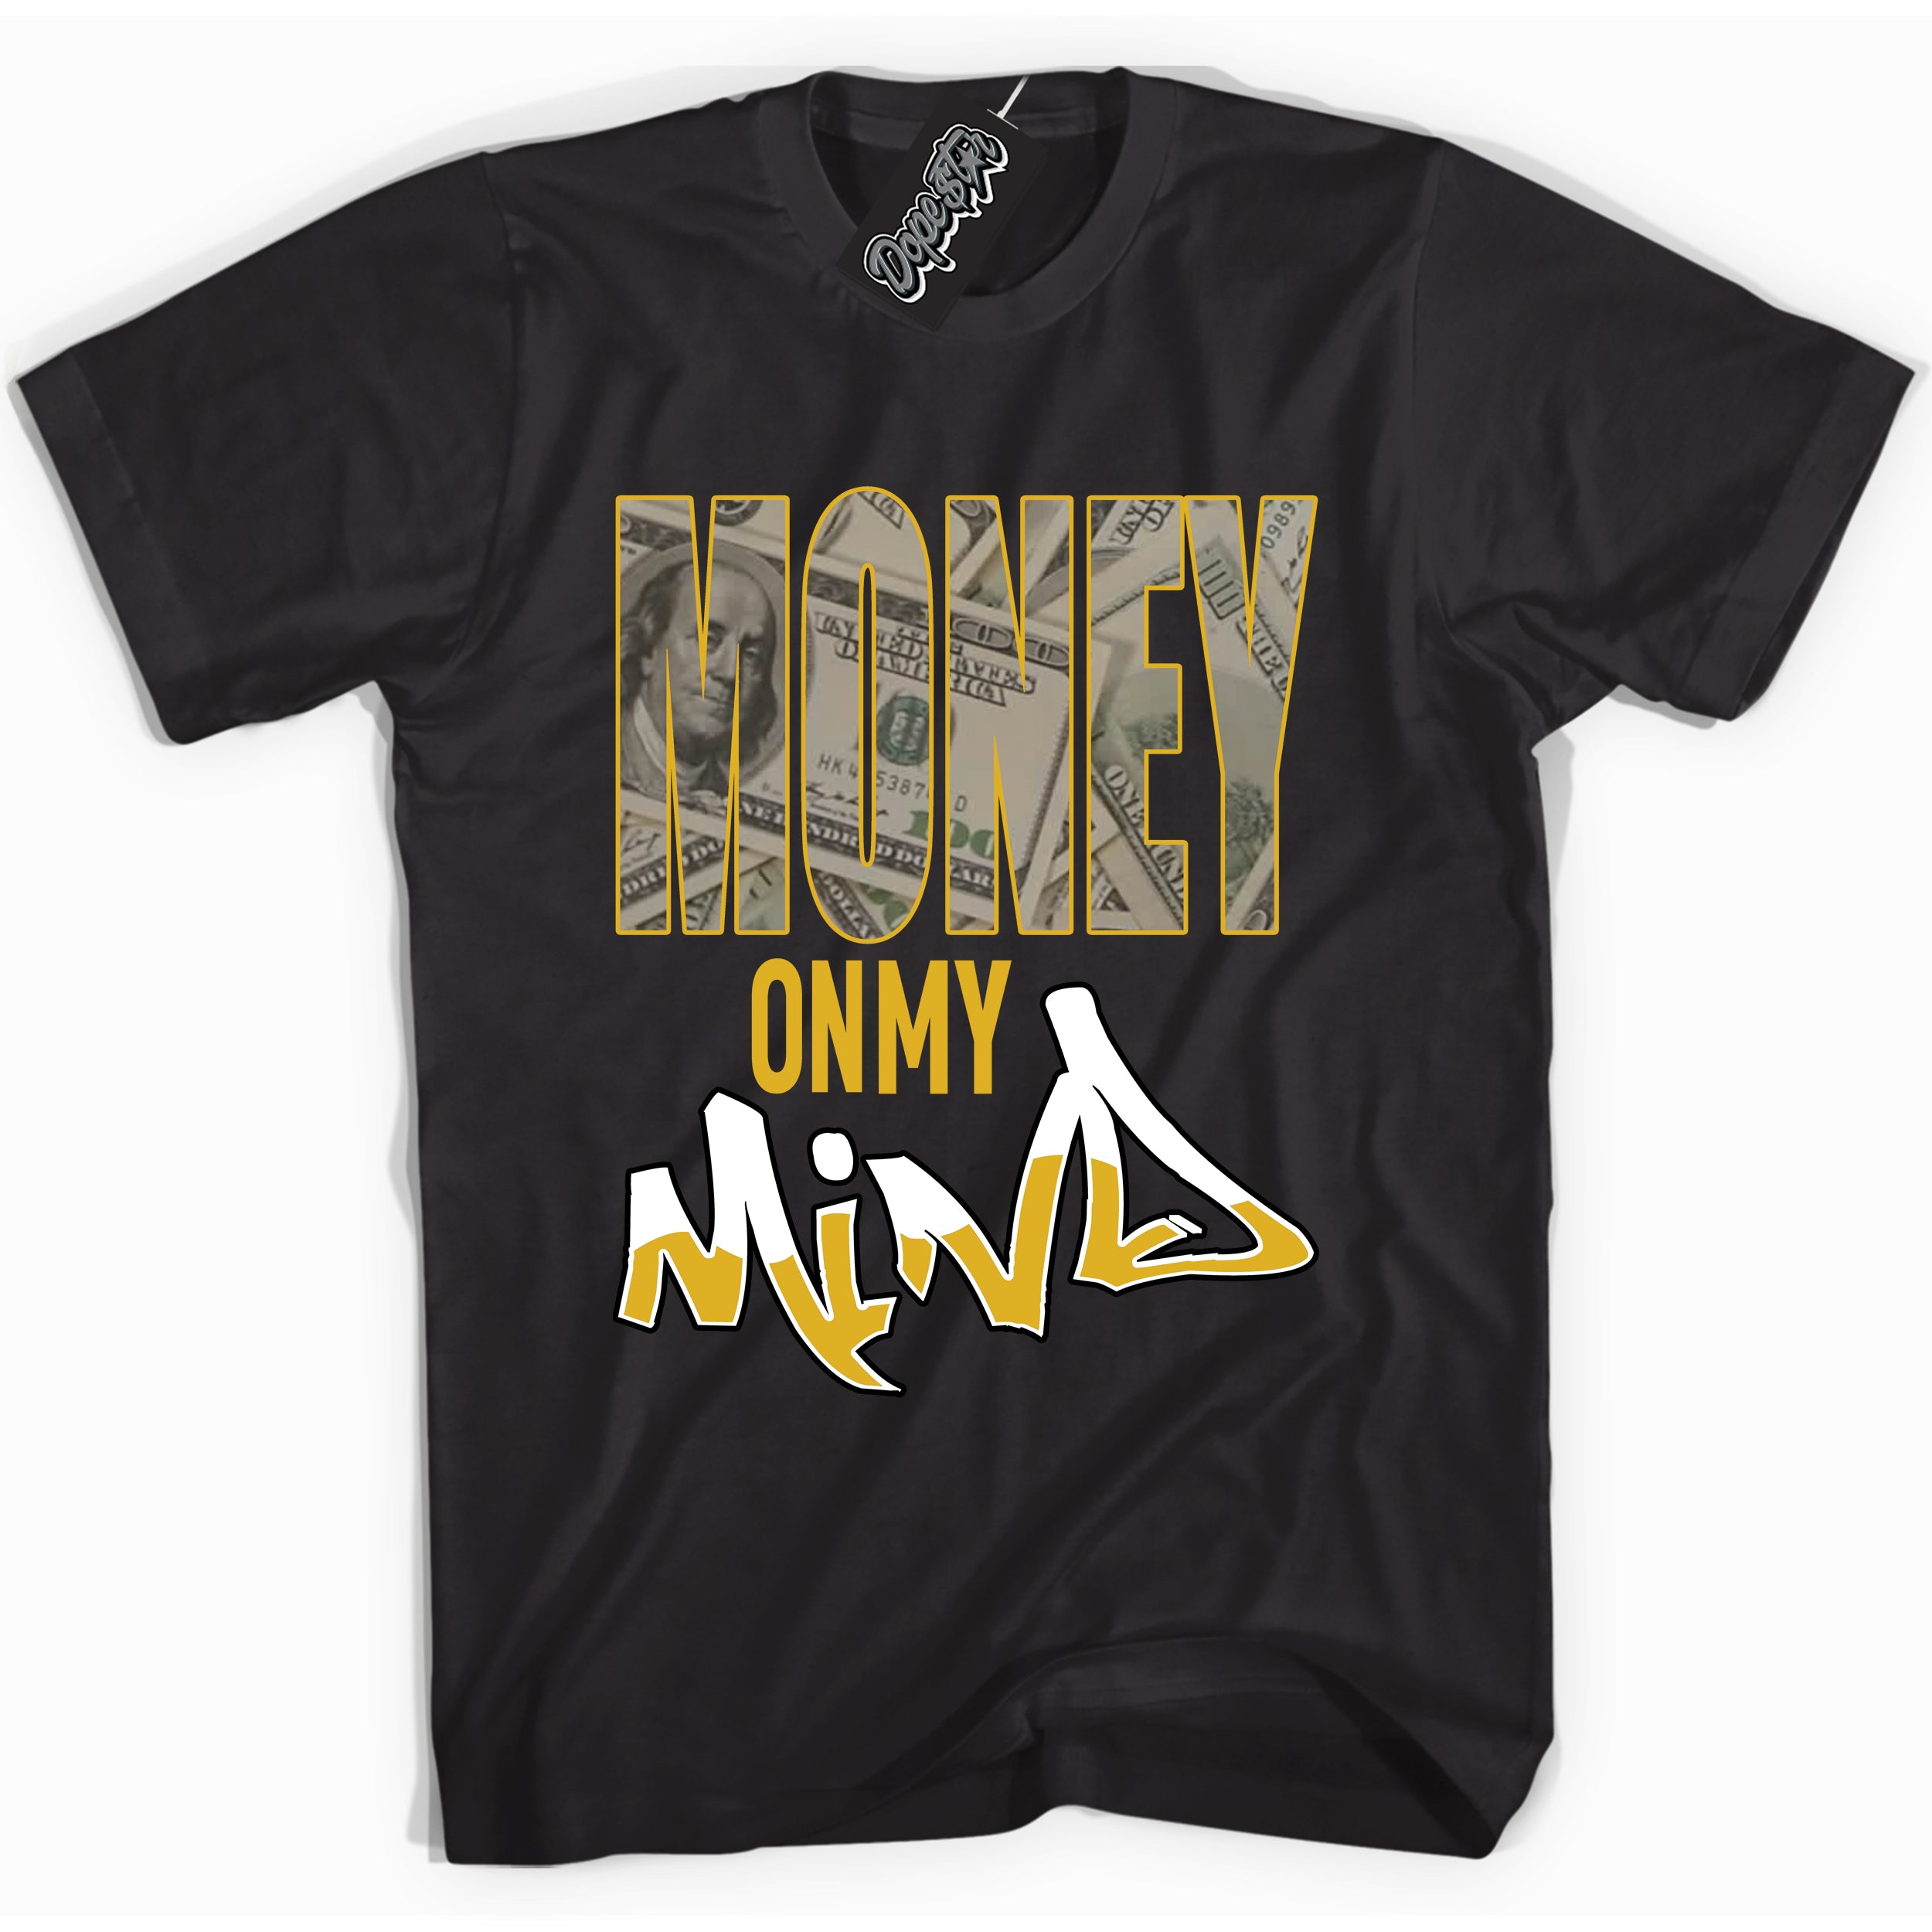 Cool Black Shirt with “ Money On My Mind” design that perfectly matches Yellow Ochre 6s Sneakers.